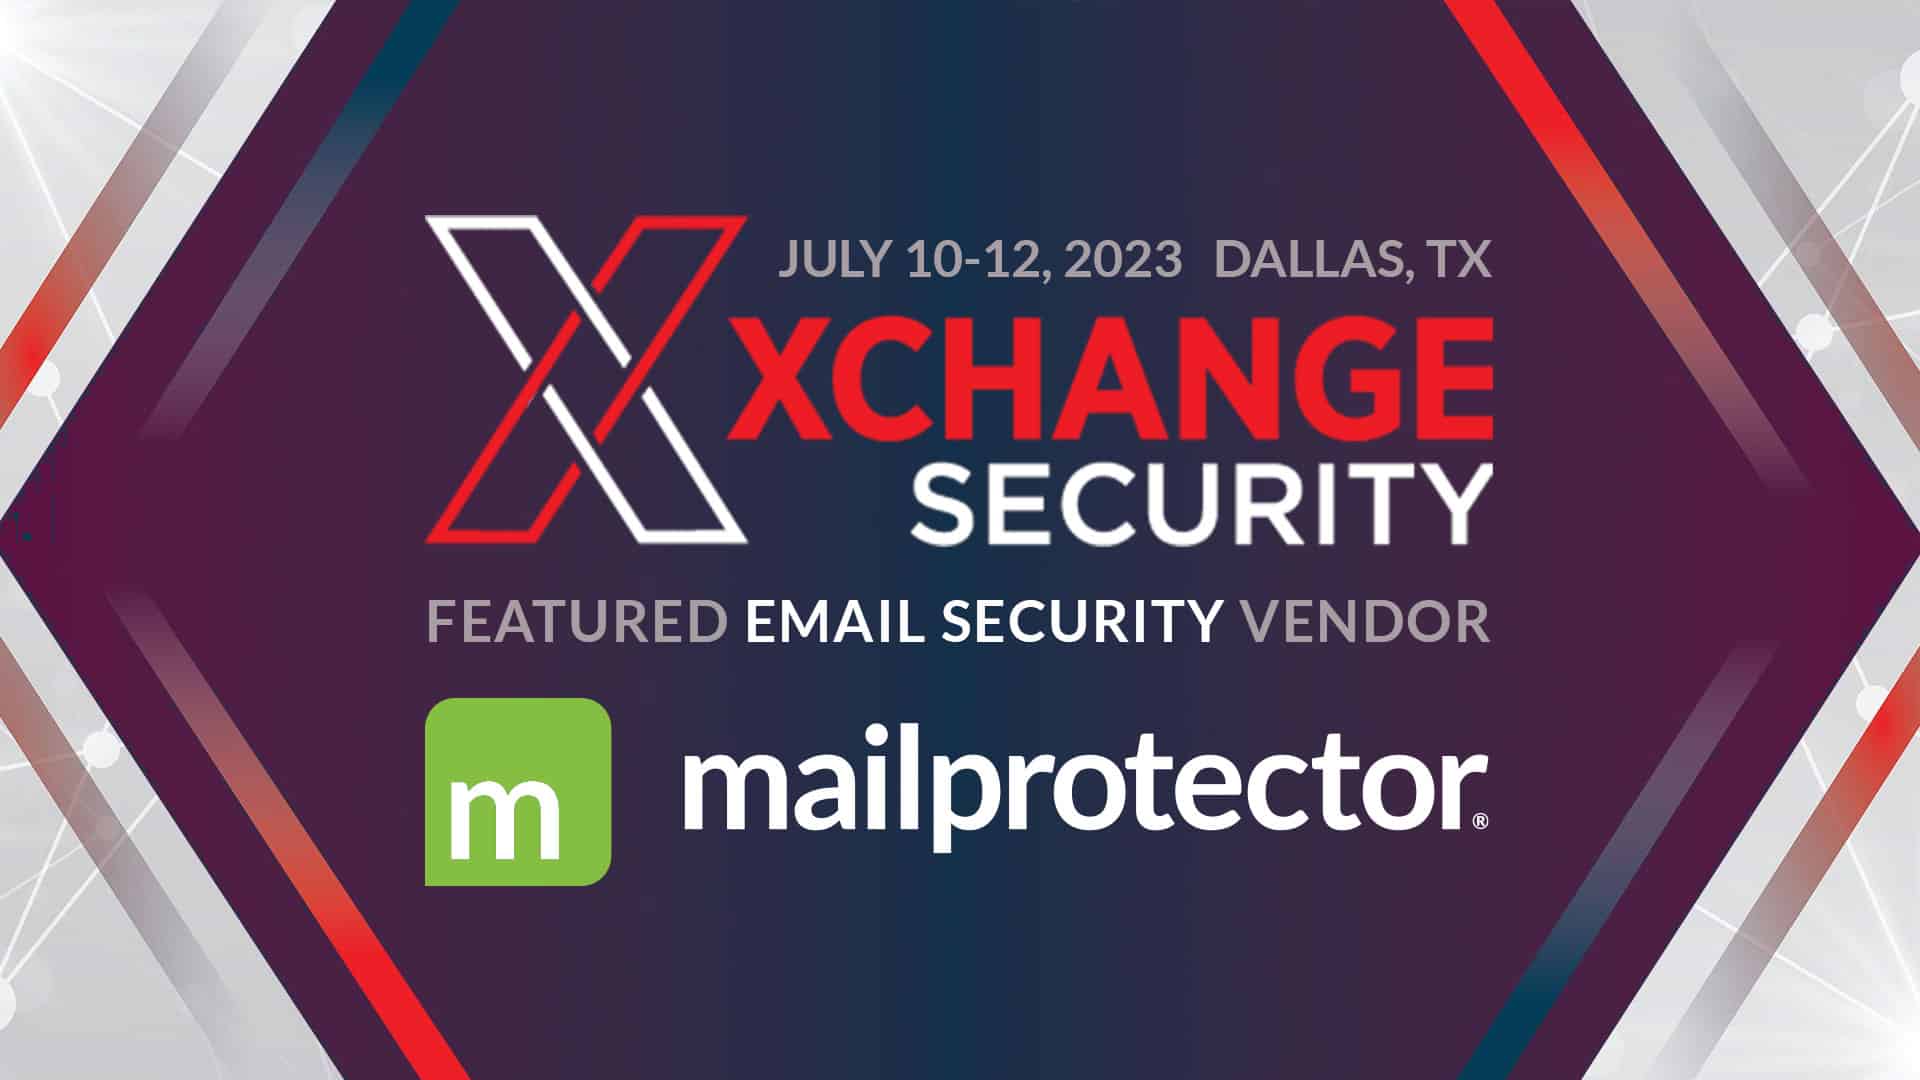 Mailprotector at Xchange Security MSP Event Dallas TX